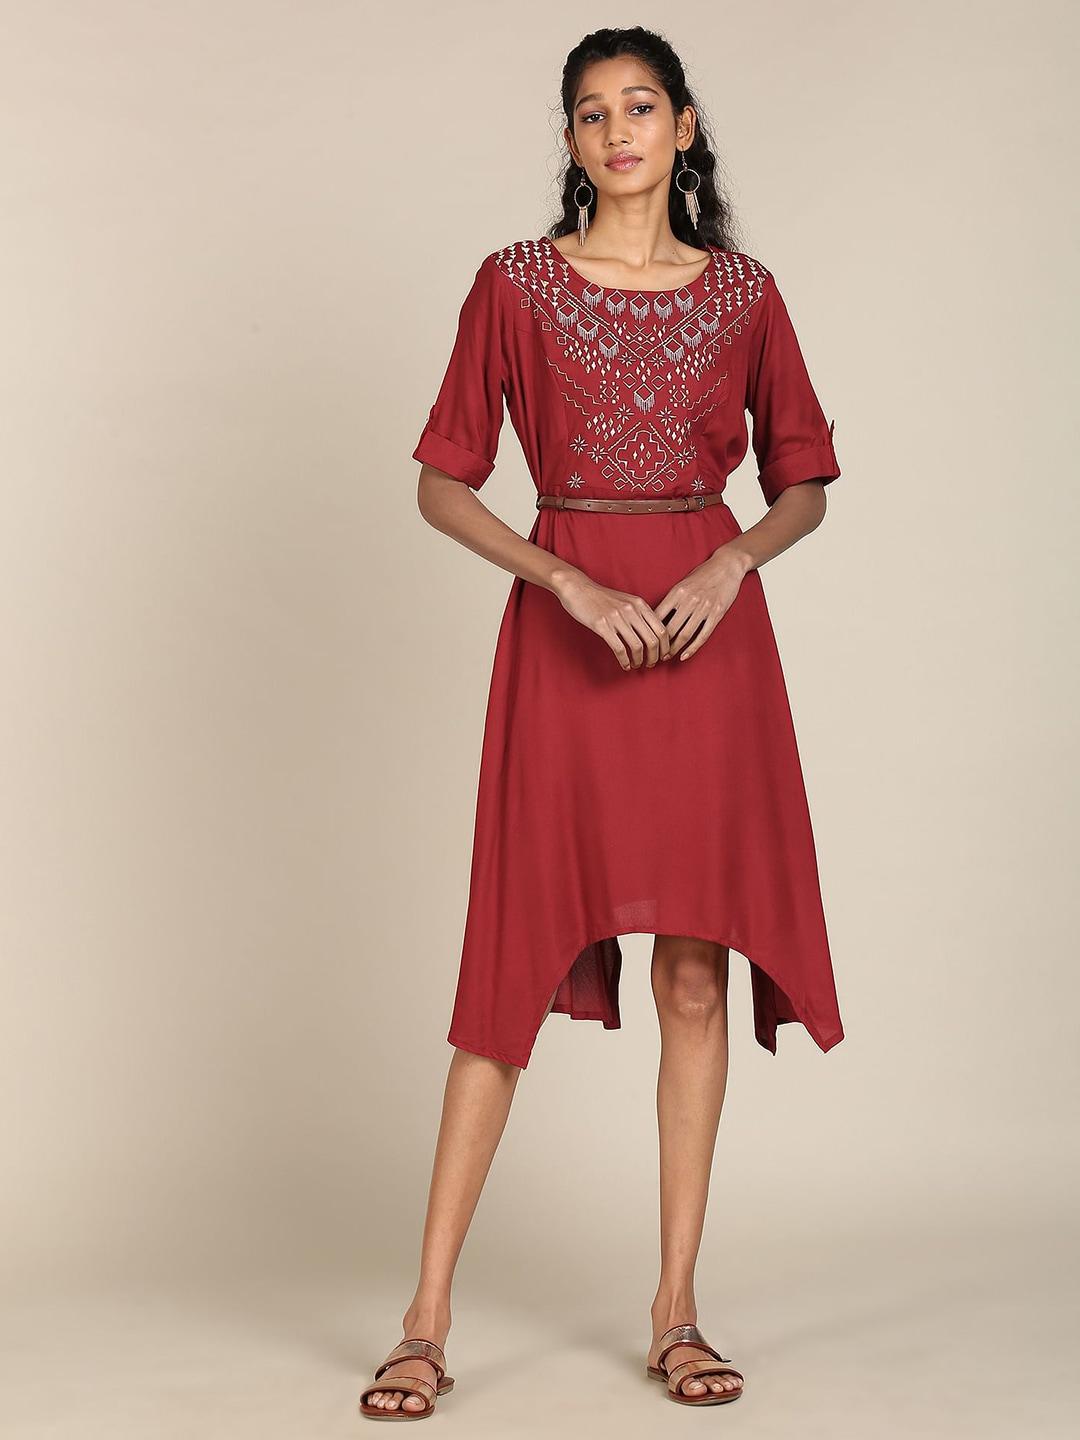 karigari-women-red-&-gold-toned-embroidered-dress